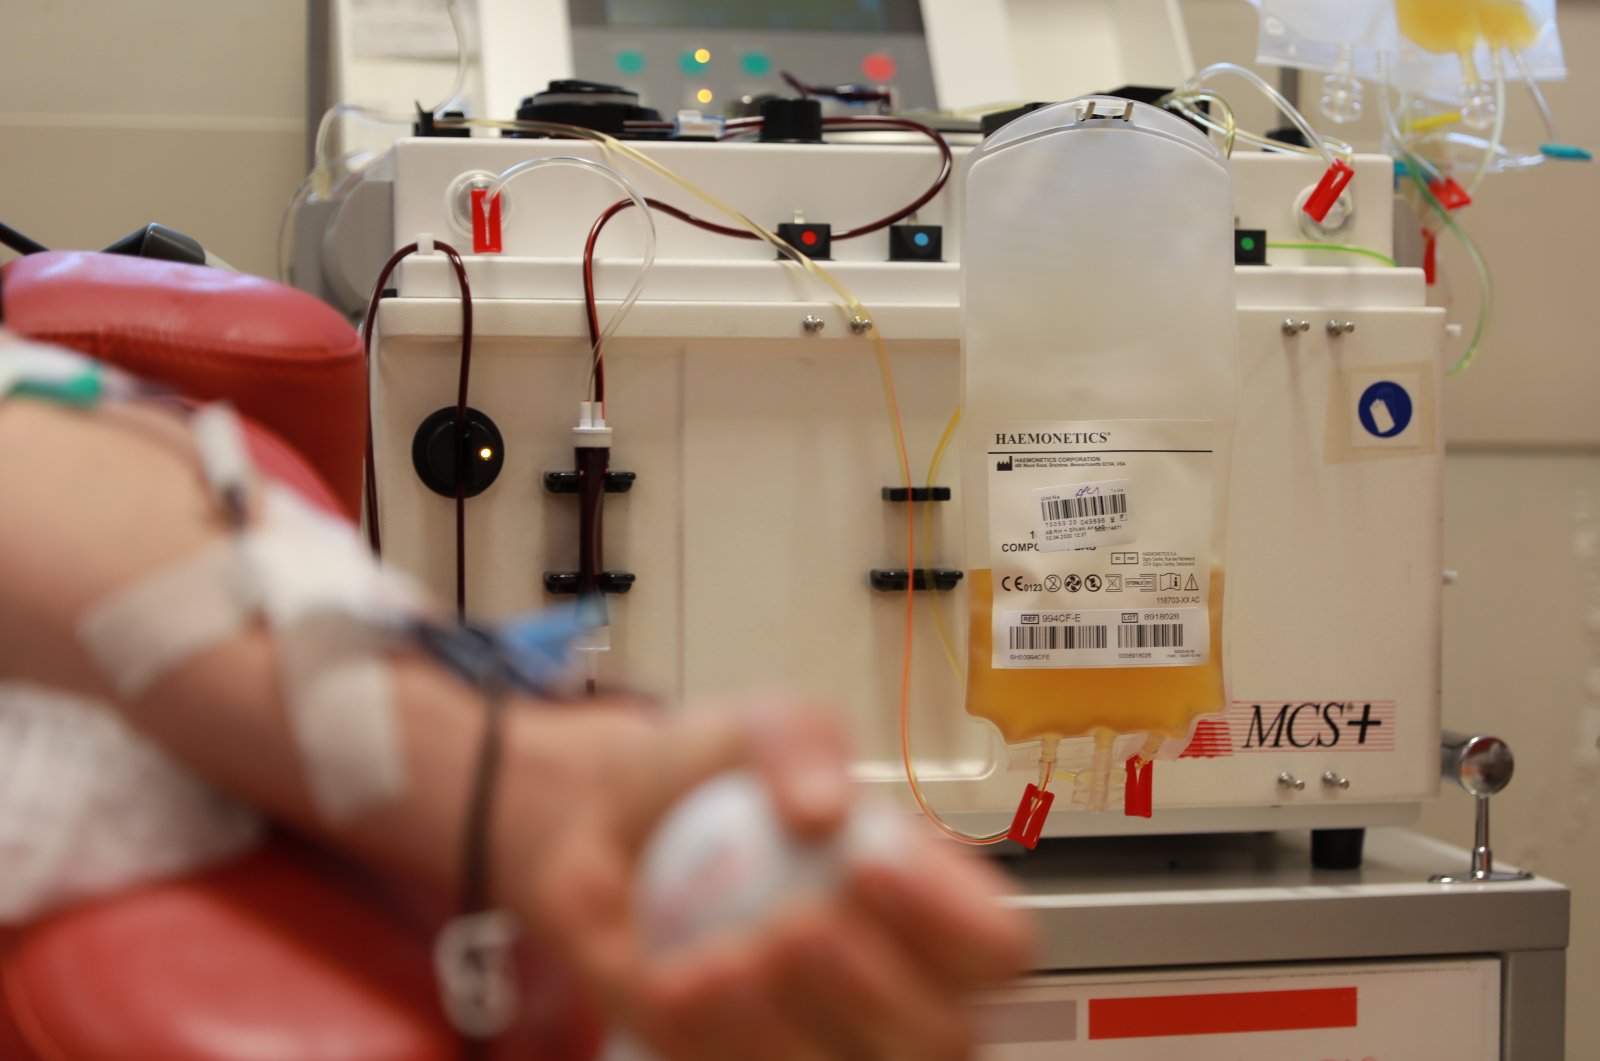 The yellow liquid part of the blood is called the plasma, and it will be used to create an immune response in current patients. (Courtesy of the Turkish Red Crescent)